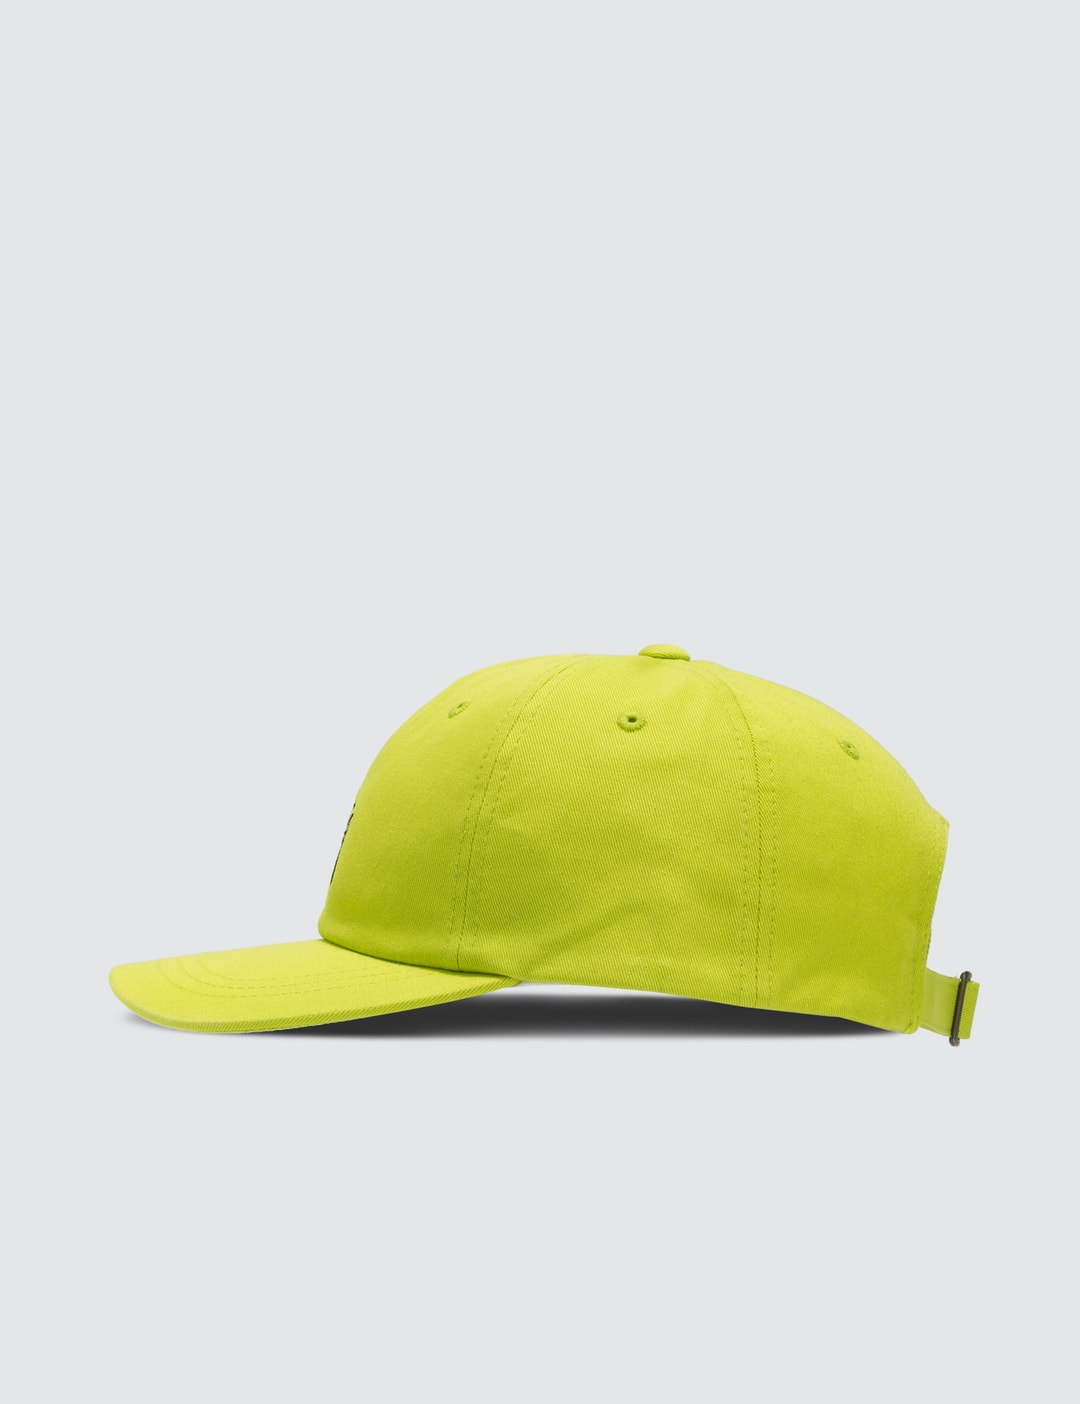 Stüssy - Stock Low Pro Cap | HBX - Globally Curated Fashion and ...